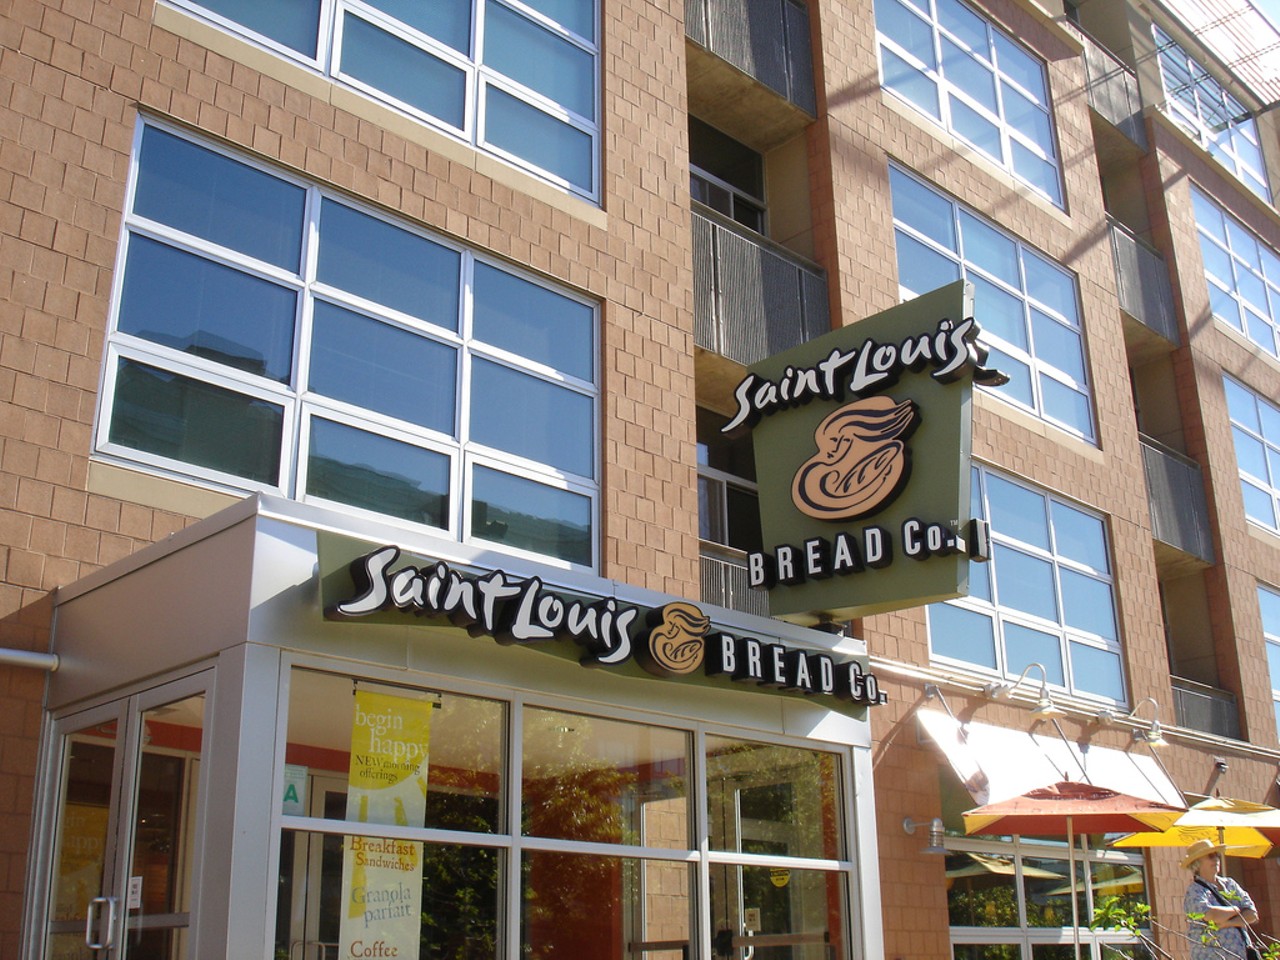 Thou shalt refer to it only as “St. Louis Bread Co.,” not Panera.